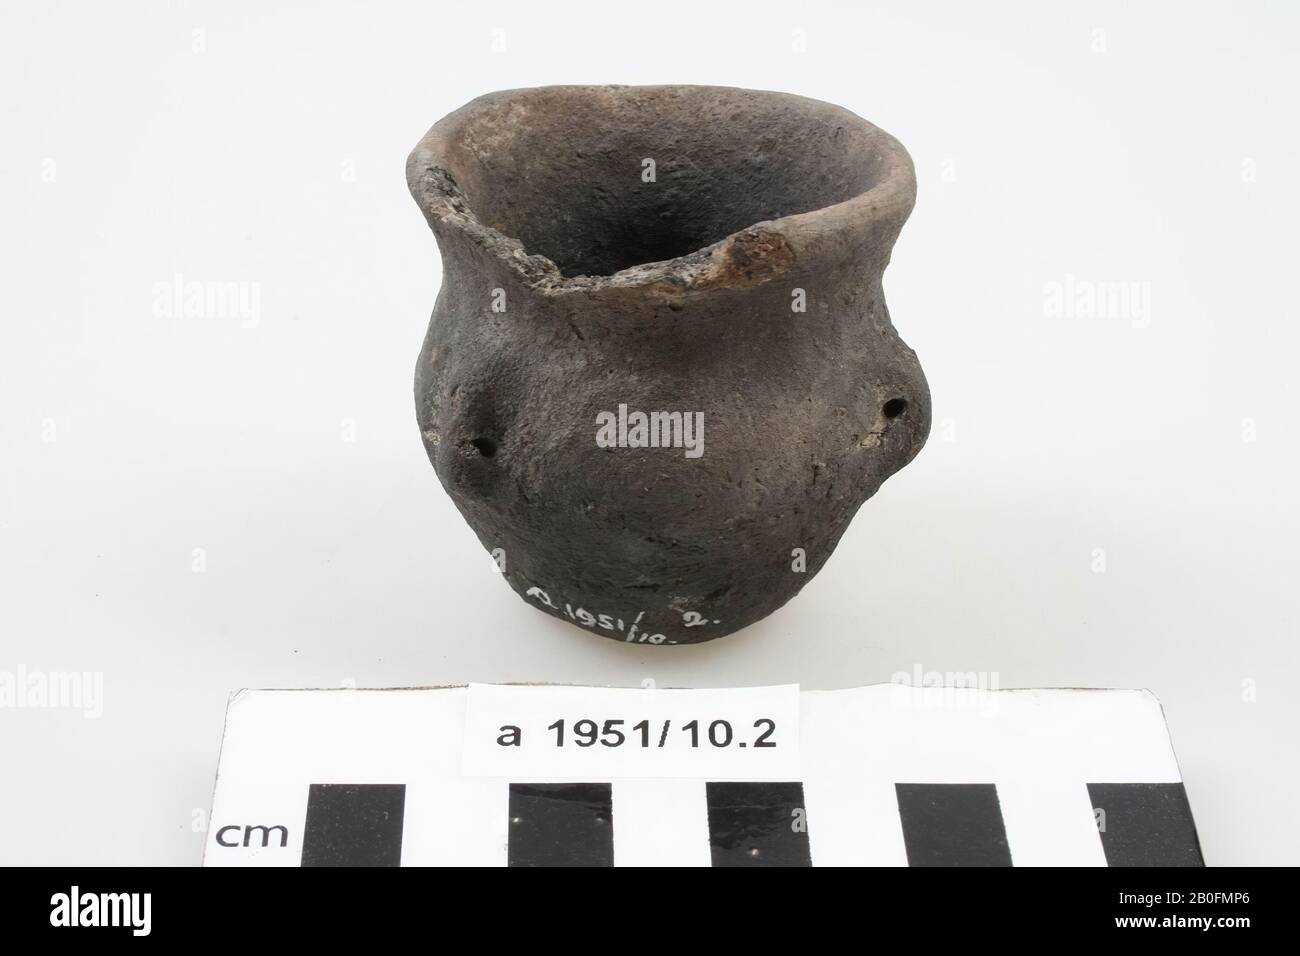 Pot with three ears of dull, black smothered, hand-formed, earthenware. The rim is damaged., Pot, earthenware (hand molded), h: 5.6 cm, diam: 5.7 cm, br (incl. Ears): 6.3 cm, roman, Netherlands, Friesland, Ferwerderadiel, Janum Stock Photo